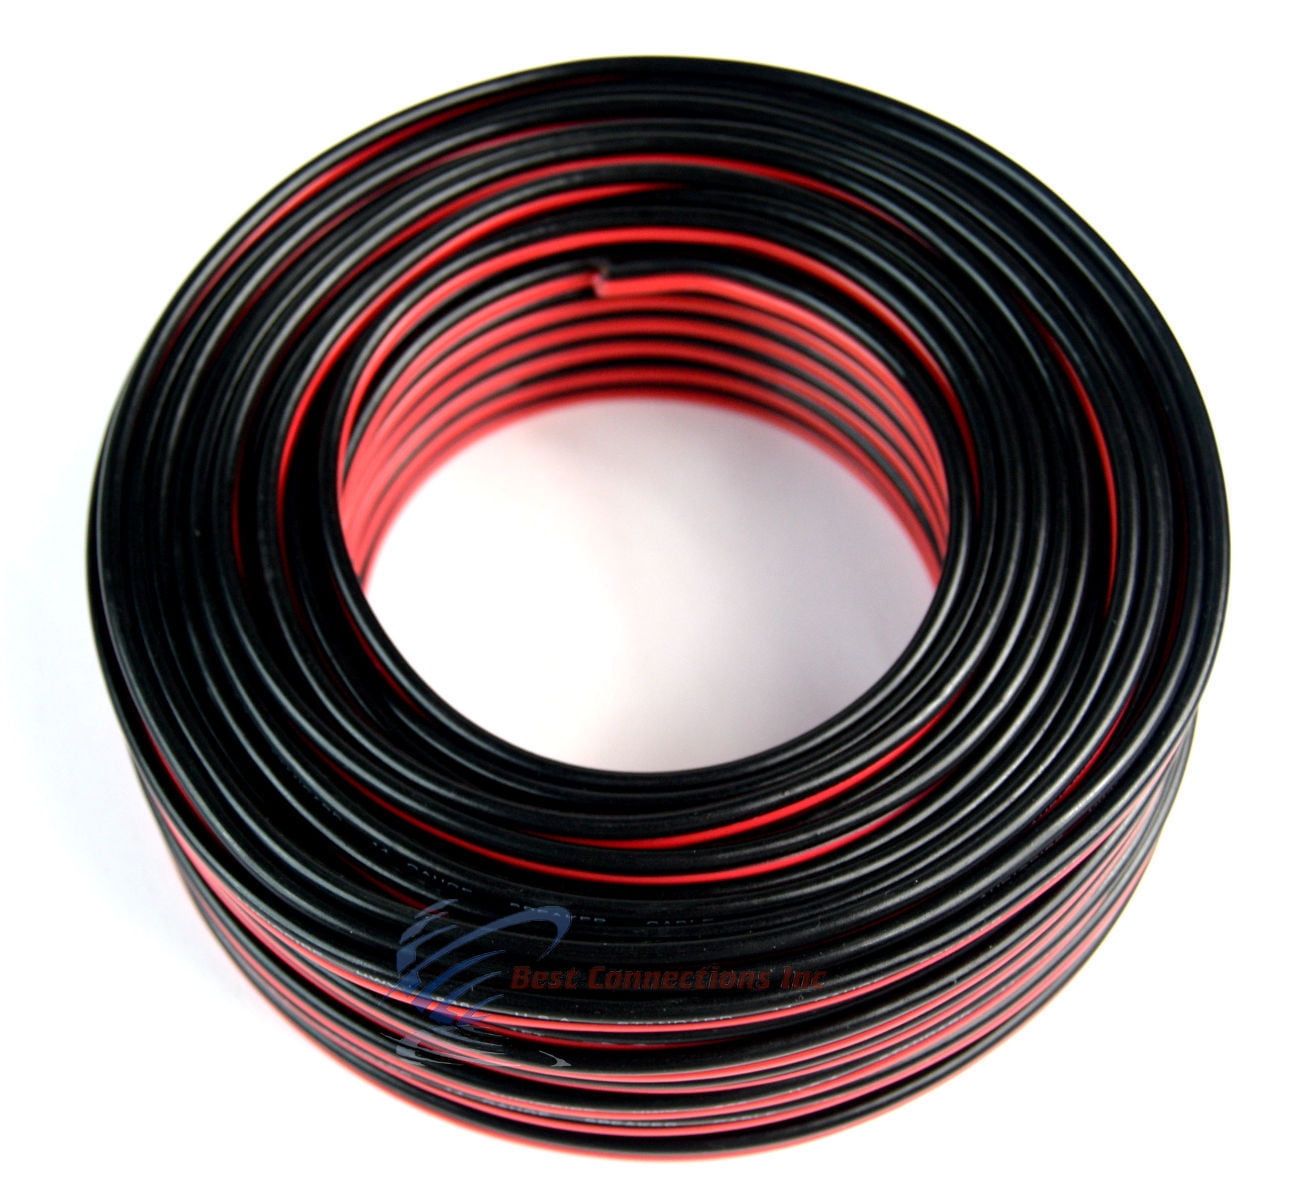 12 Gauge 30' ft SPEAKER WIRE Red Black Cable Car Audio Home Stereo 12V DC Power